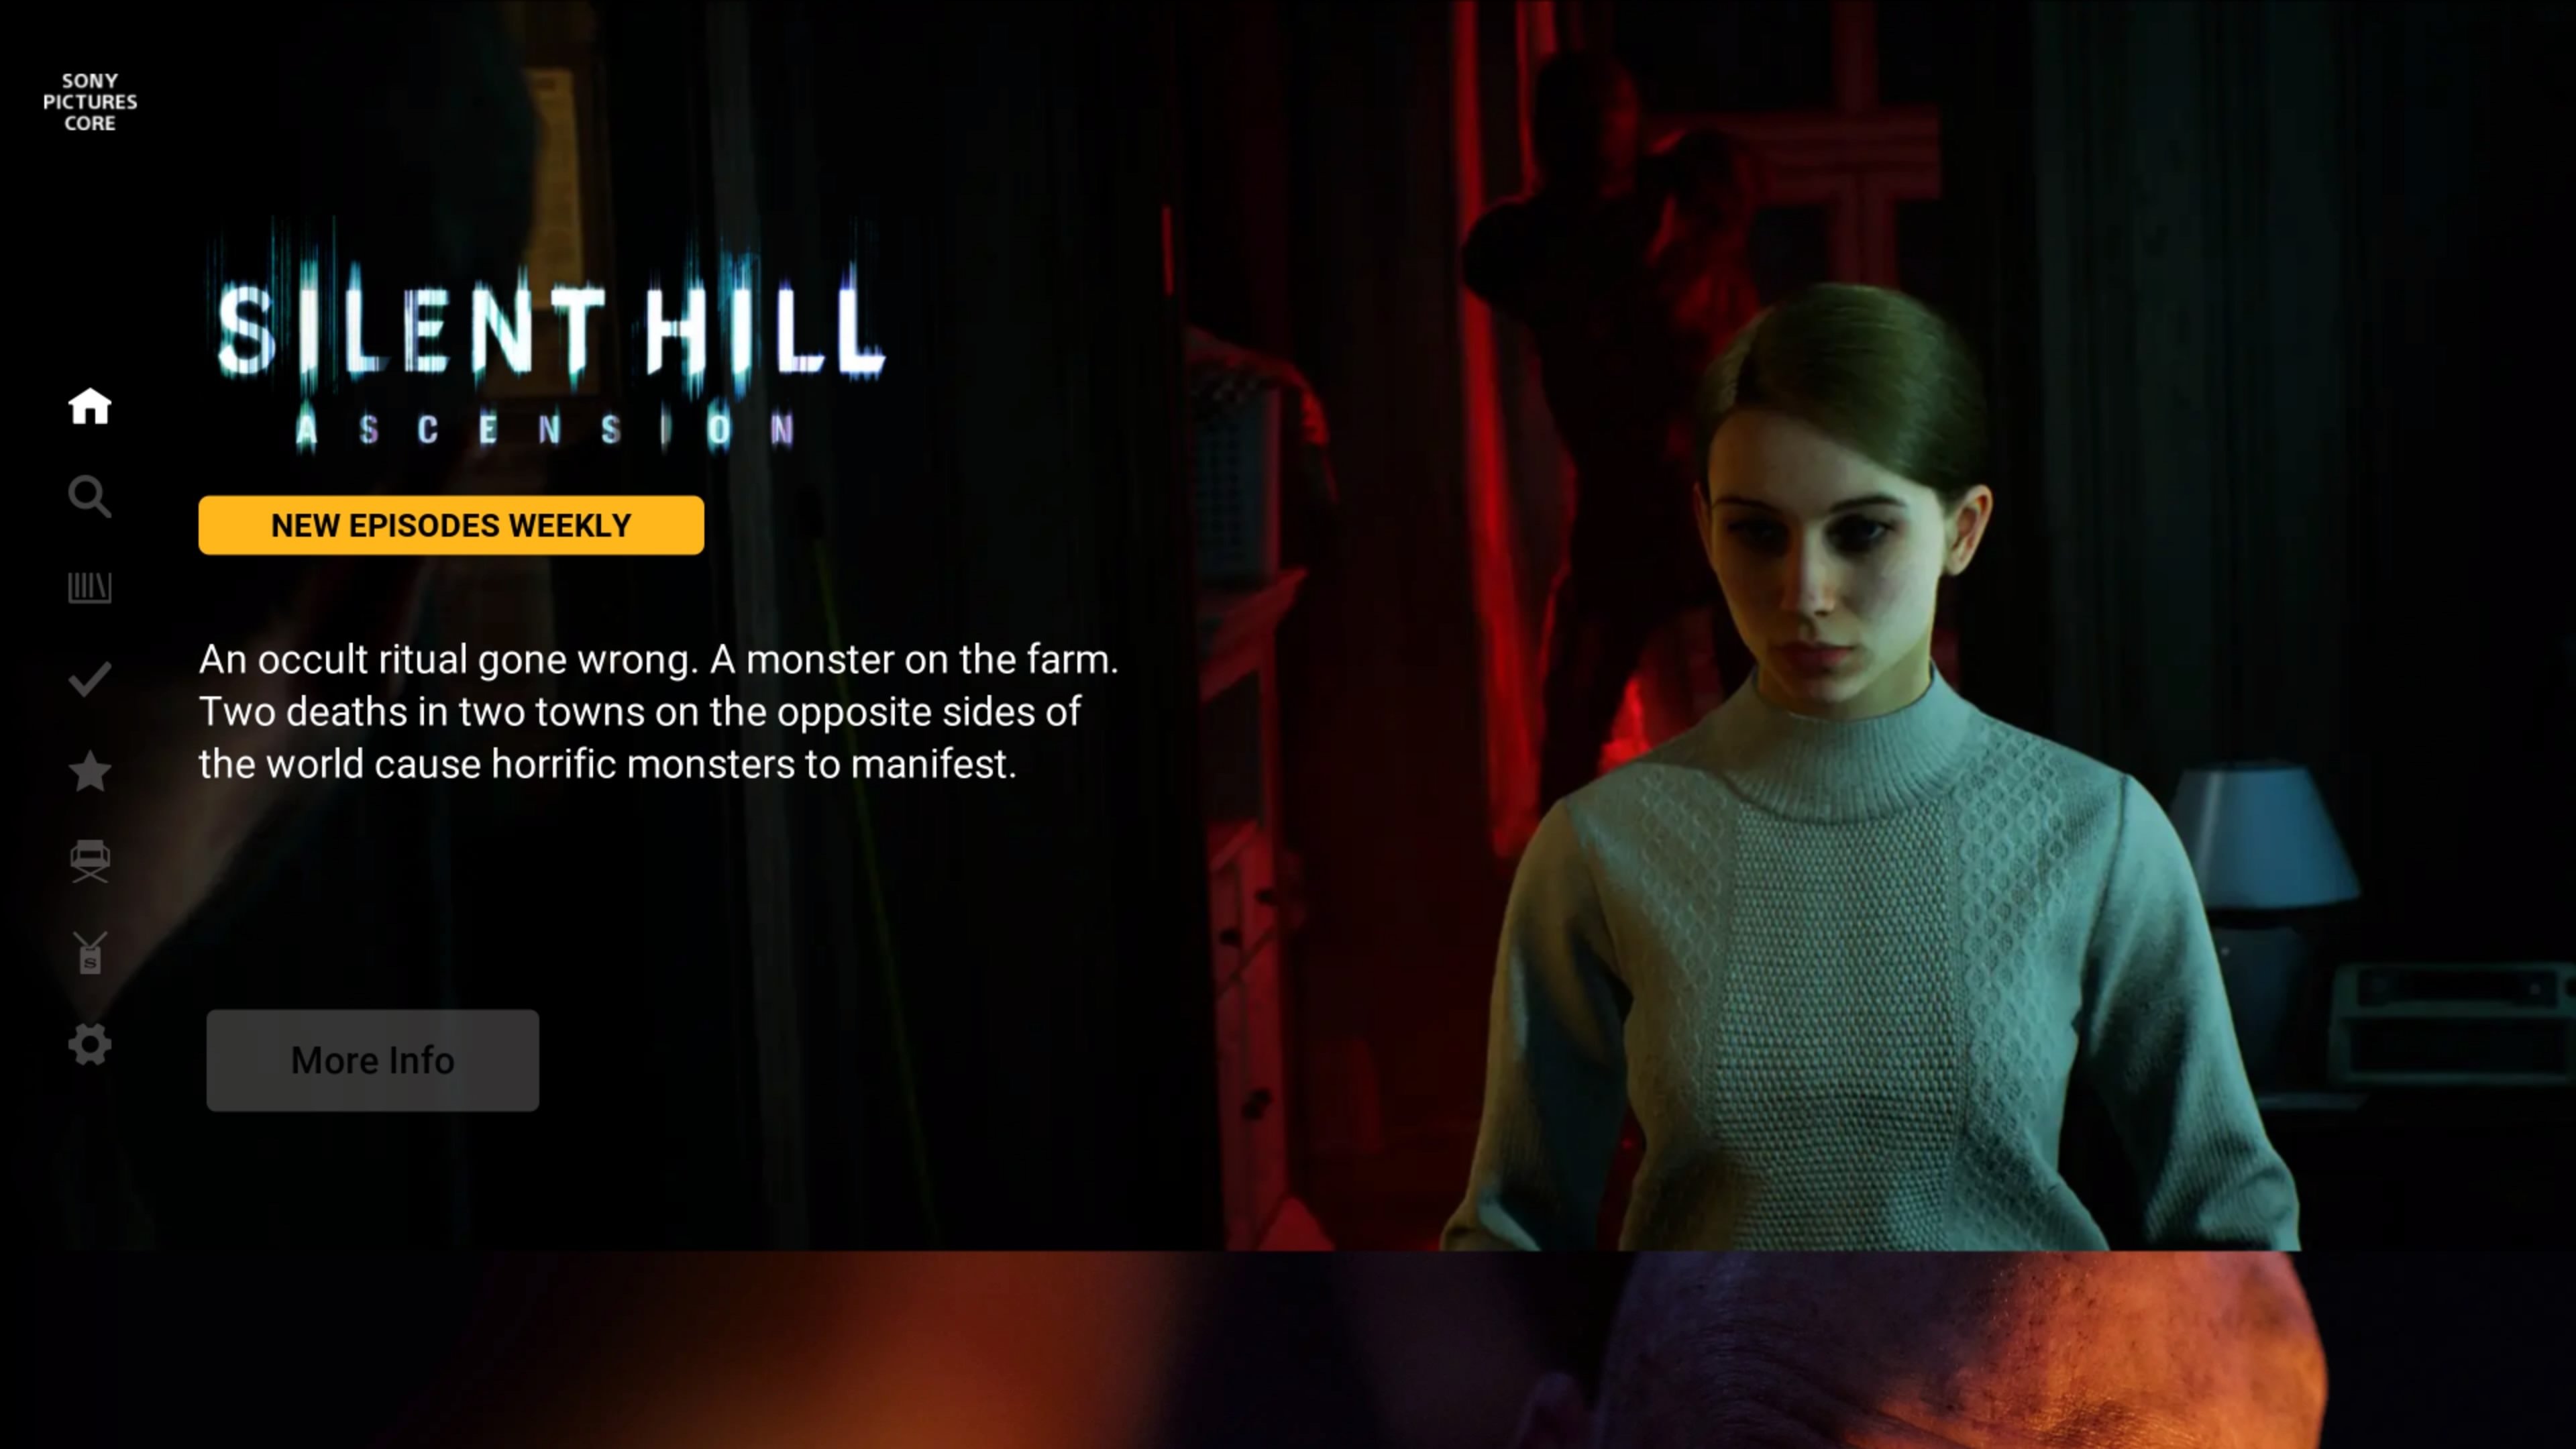 Silent Hill: Ascension is an interactive streaming series coming